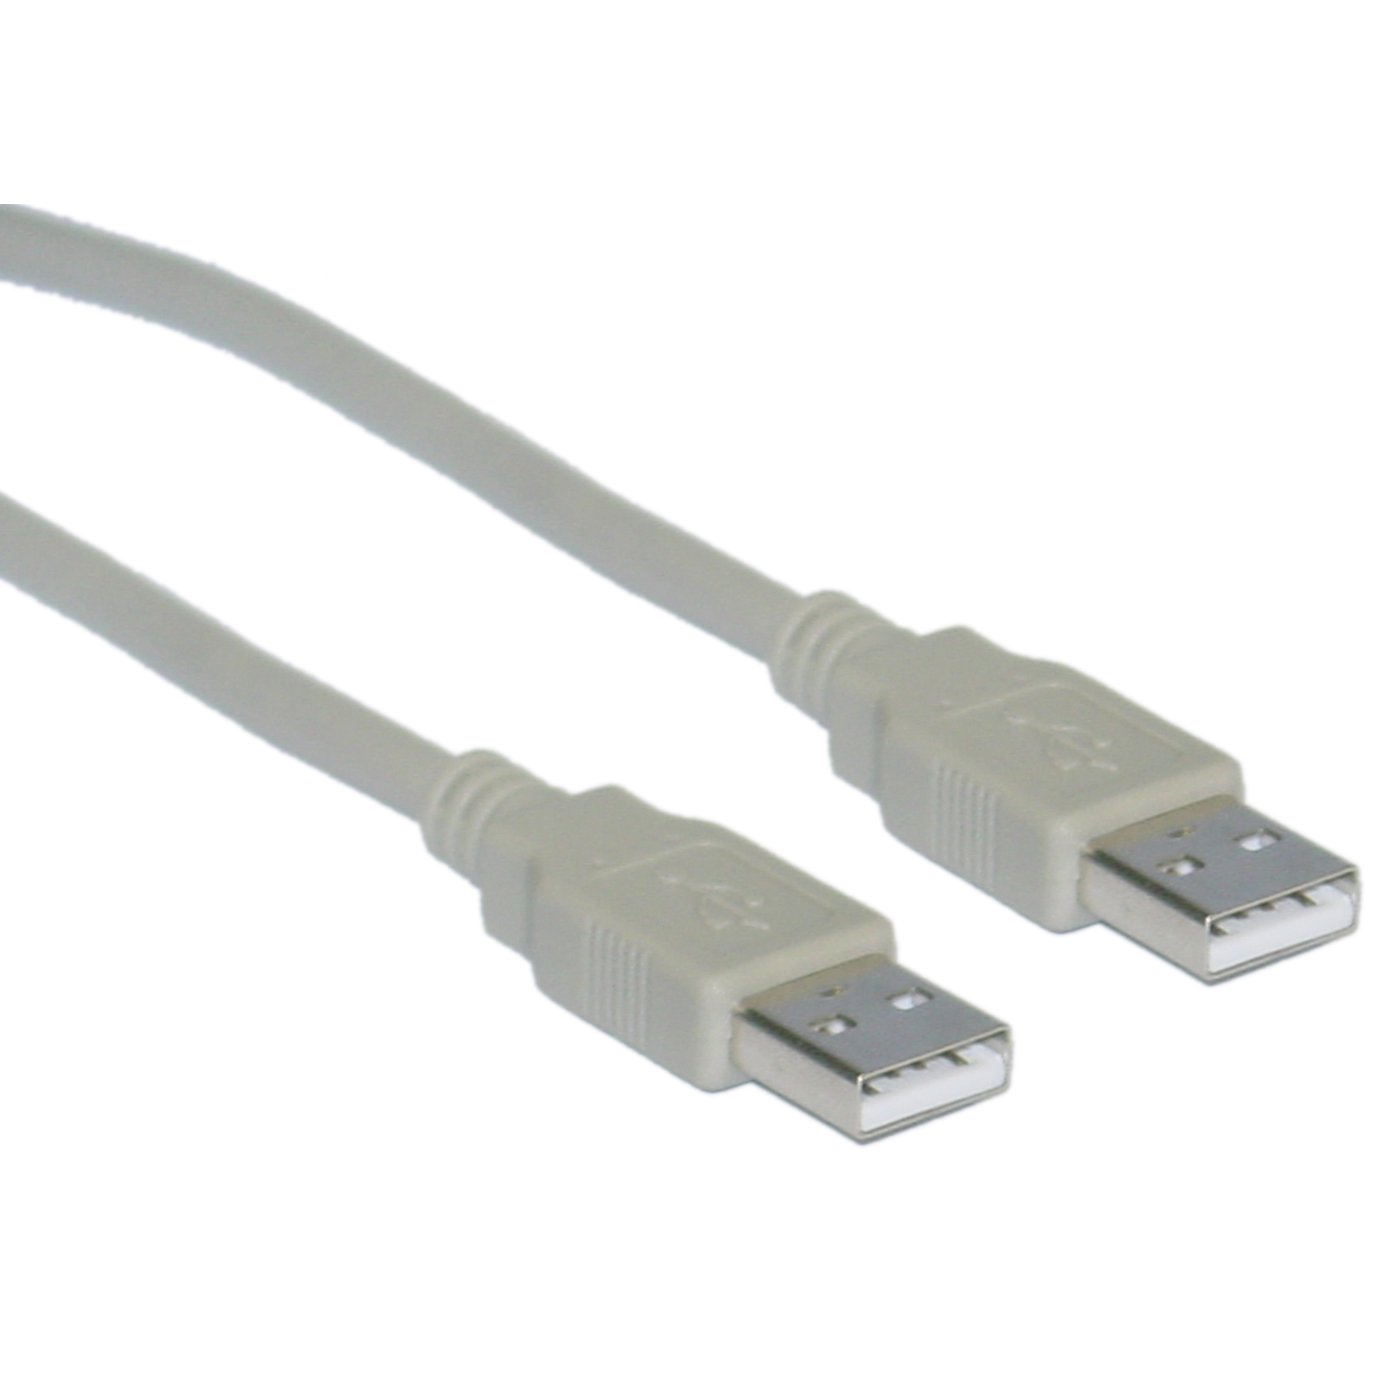 10FT USB 2.0 Type A Male to Type A Male Cable, 10 foot 10U2-02110